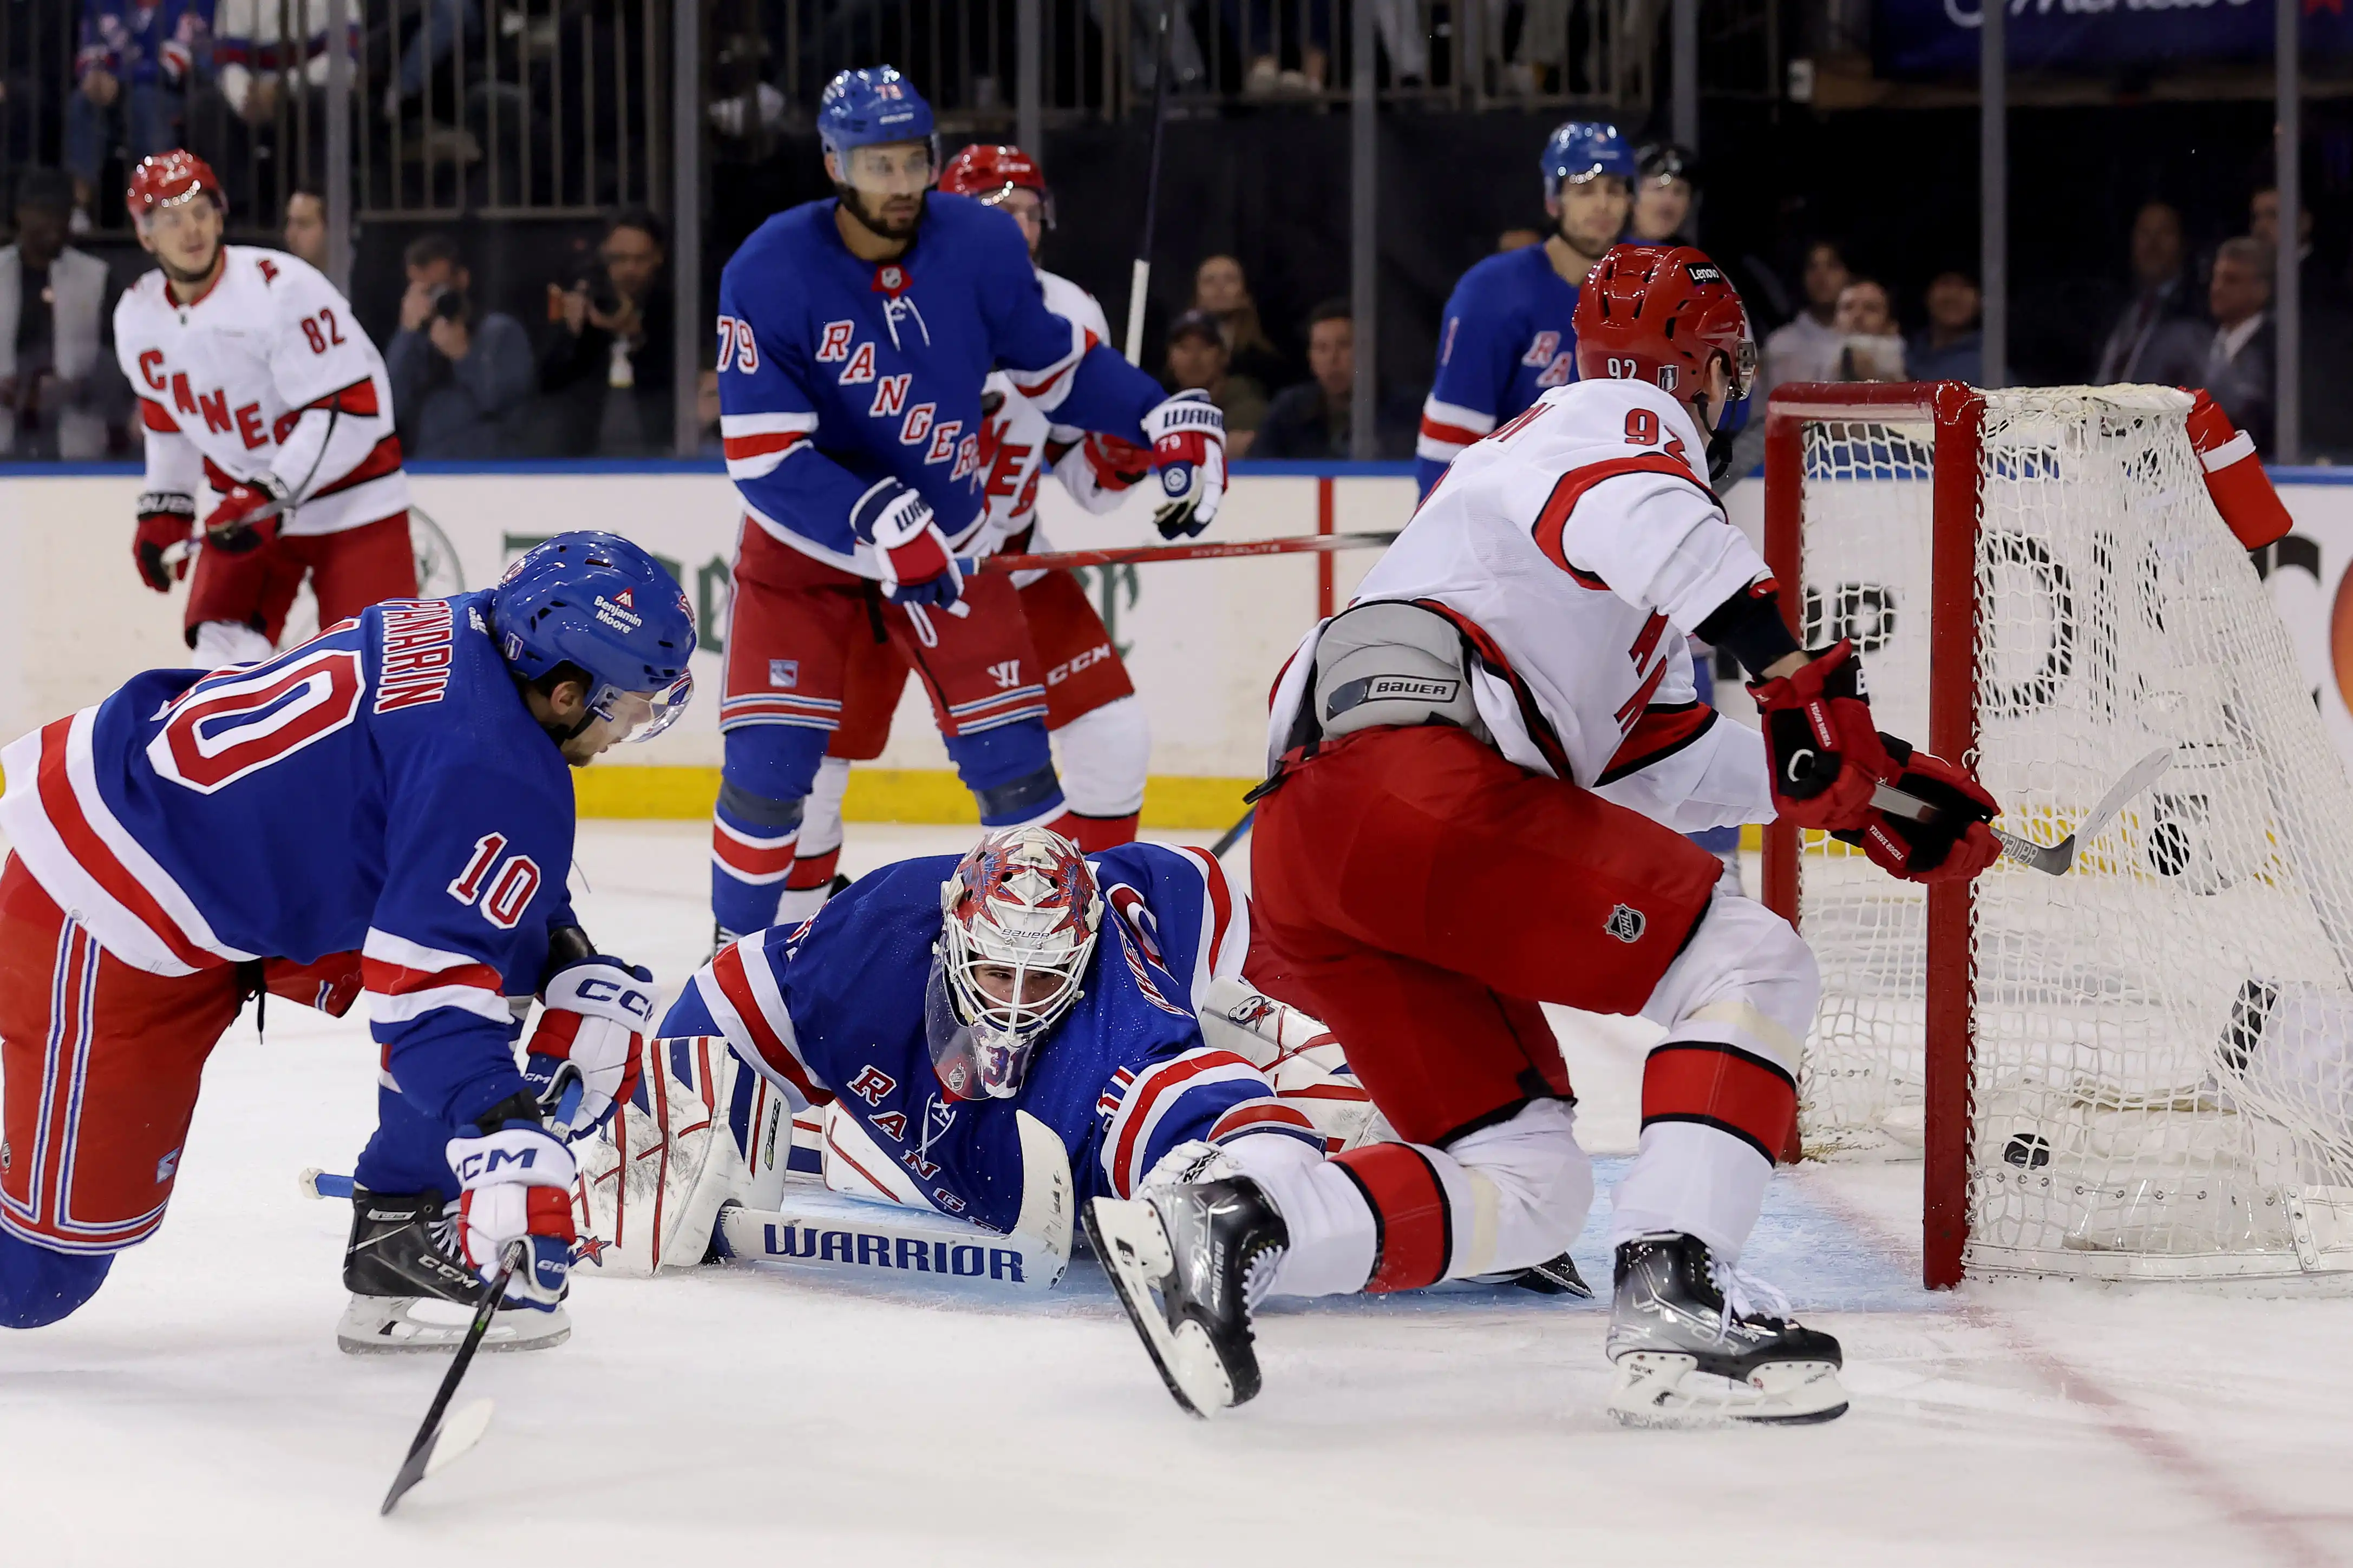 Fans react to NY Rangers' third-period collapse in Game 5 loss to Carolina Hurricanes